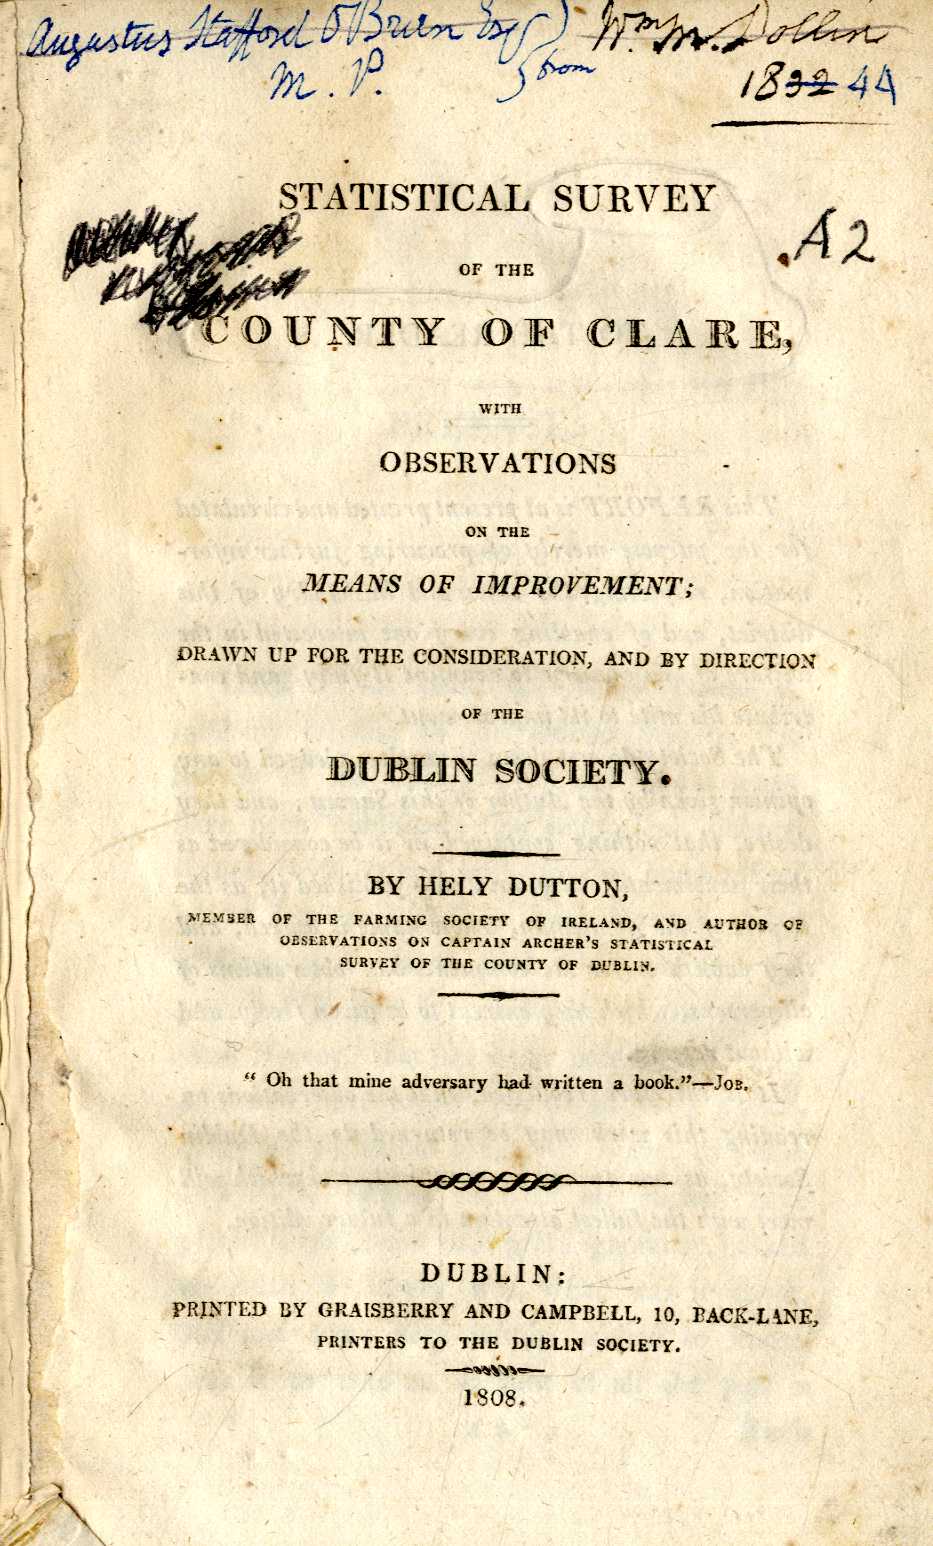 Co. Clare etc: Dutton (H.) Statistical Survey of the County of Clare, 8vo D. 1808. First Edn., lacks